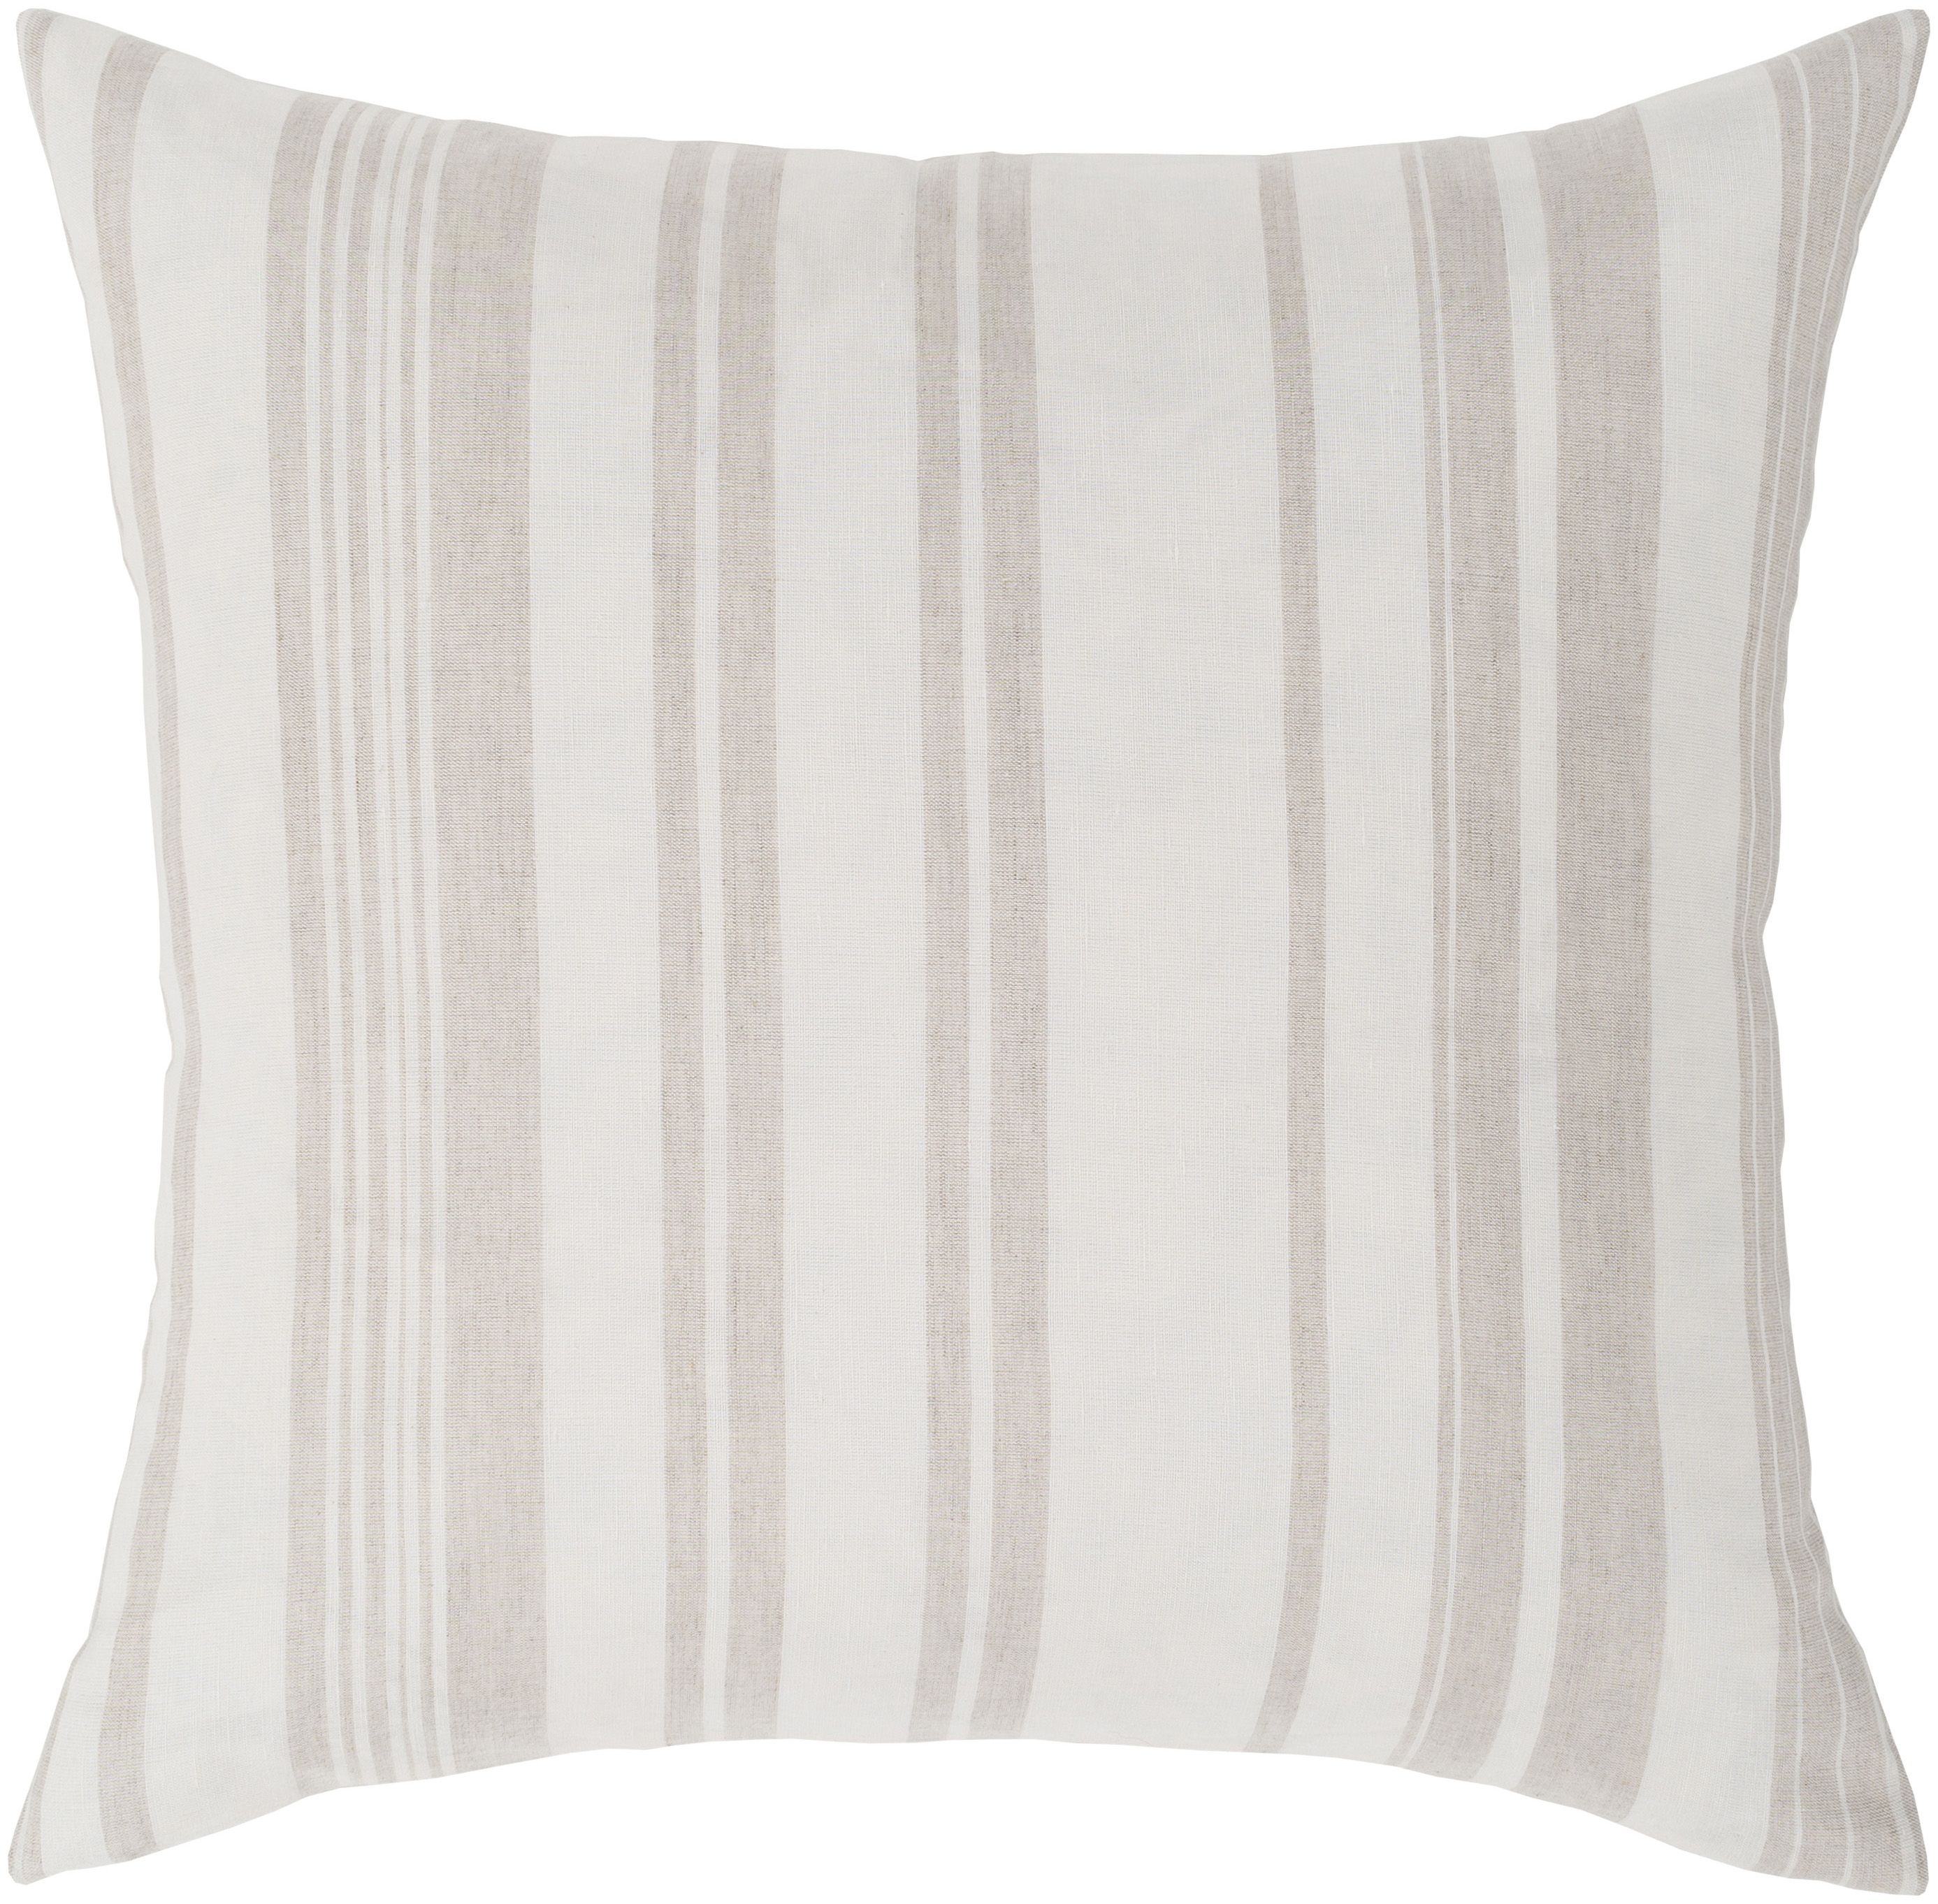 Baris - BIS-001 - 18" x 18" - pillow cover only